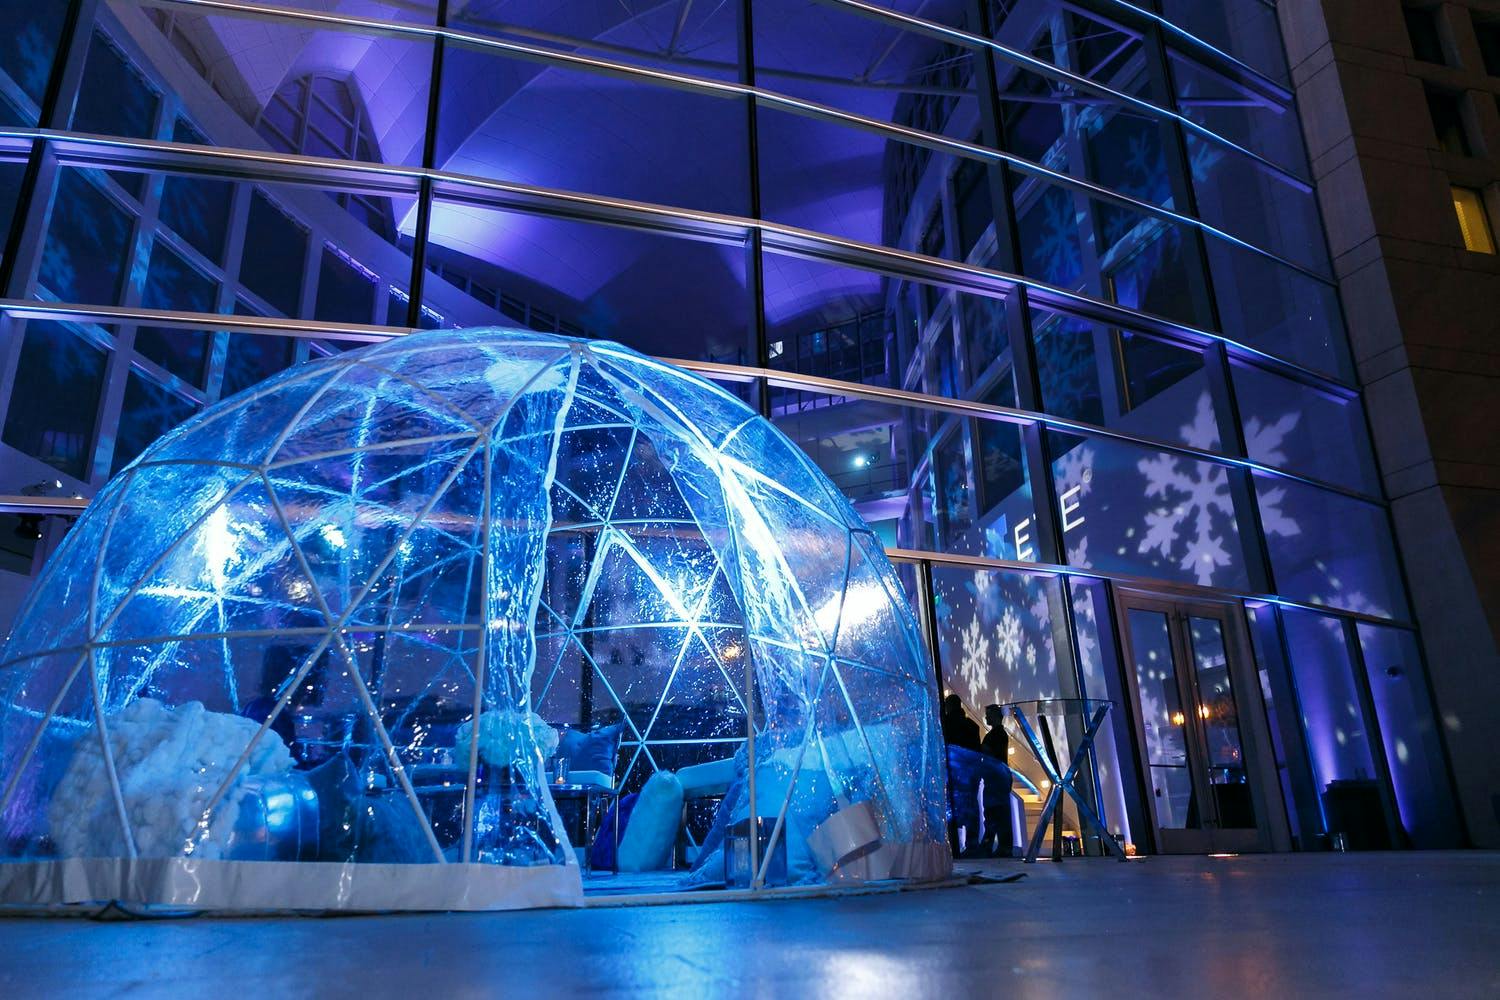 Transparent glamping igloo is lit up by blue lights in front of a wall of windows at winter blue corporate event party | PartySlate